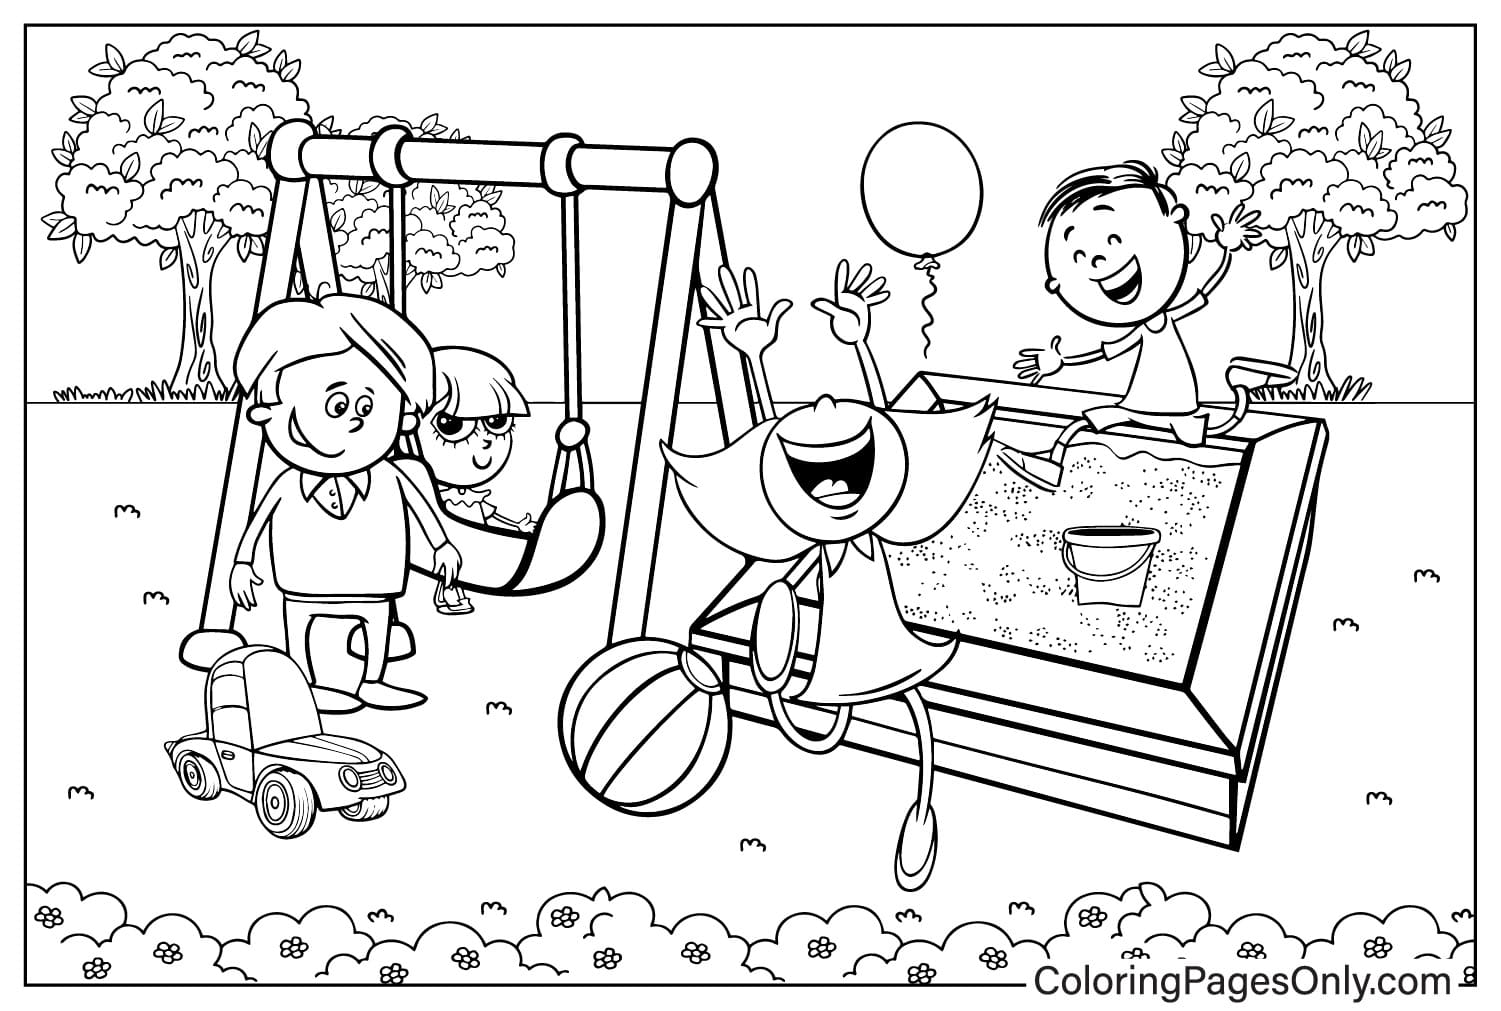 Playground Printable Coloring Page from Playground